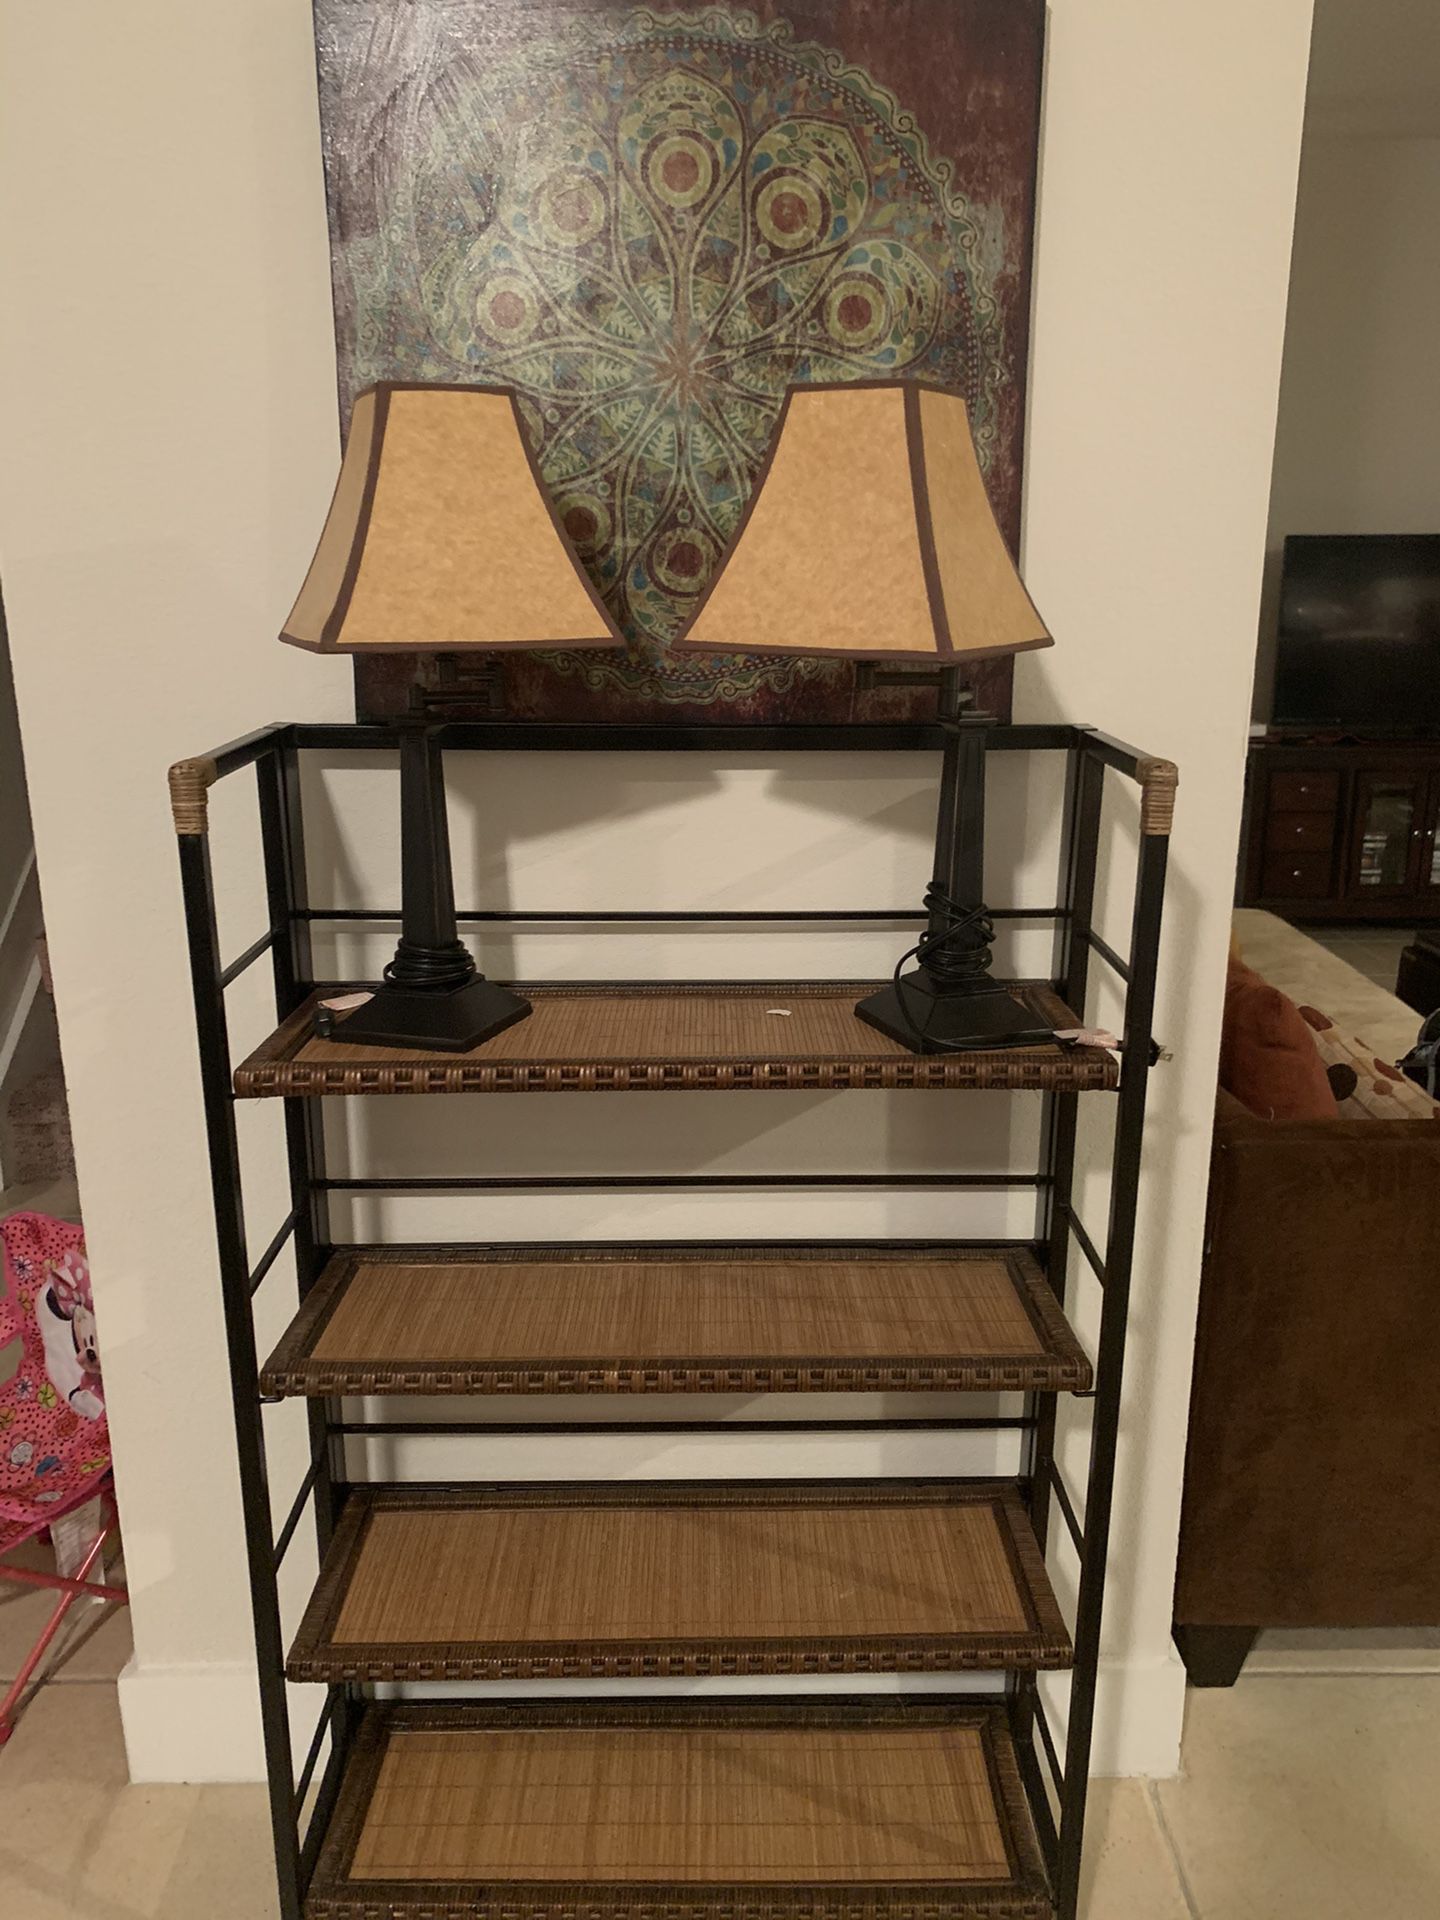 Shelf with 4 tiers, small matching trunk, 2 lamps and picture